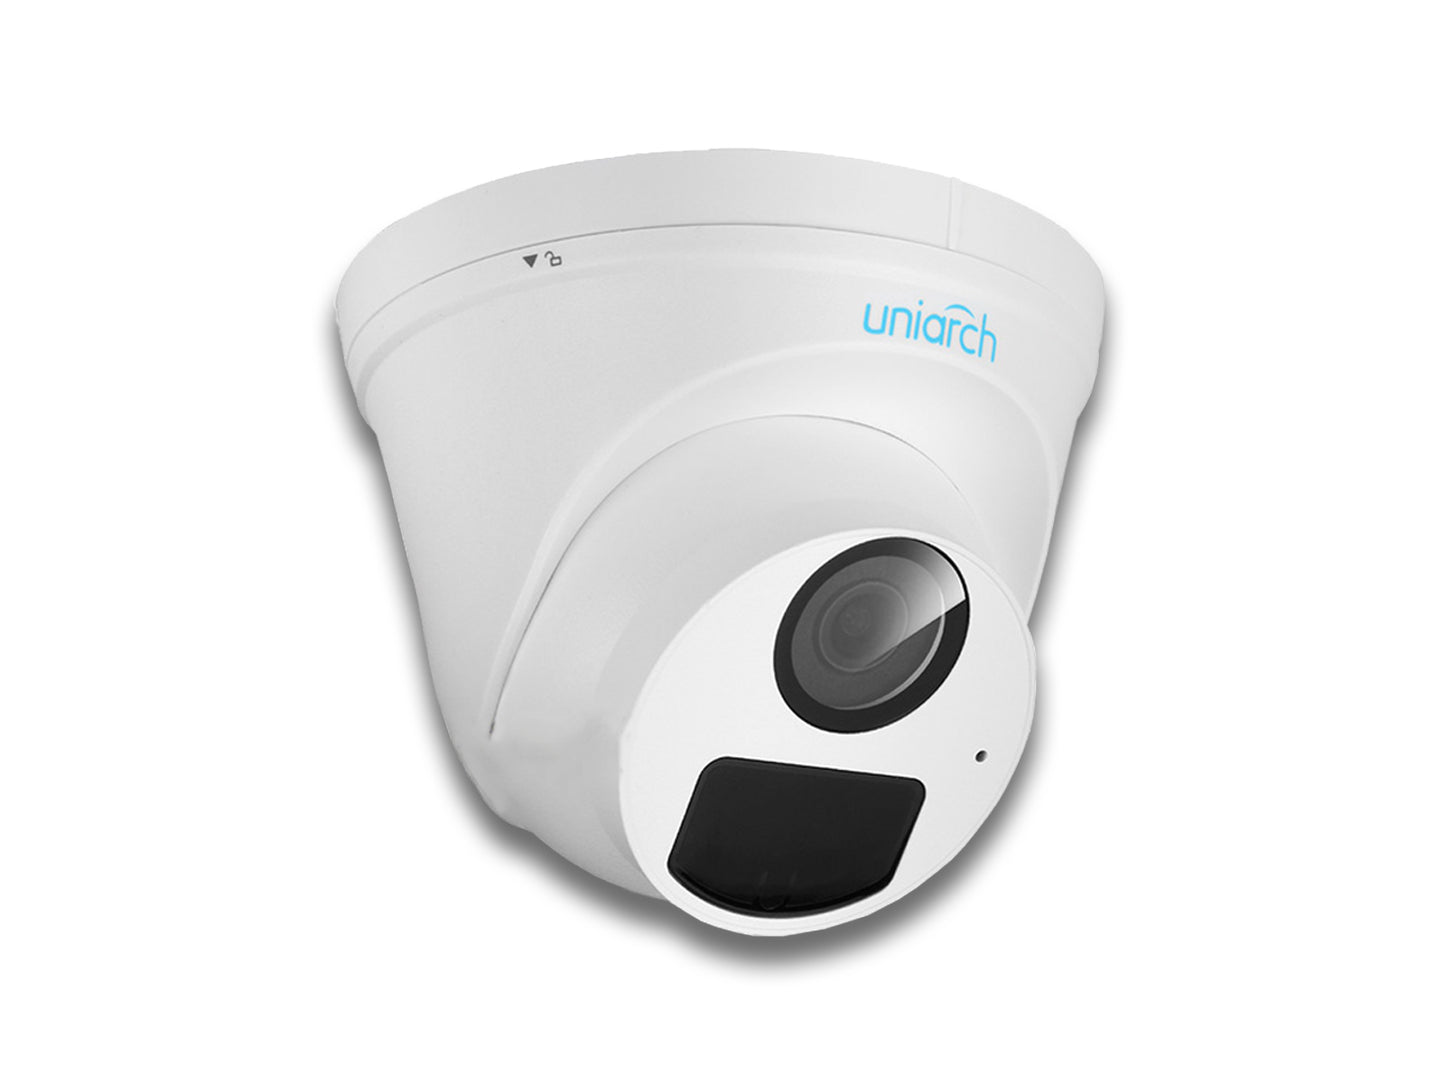 UniArch 2mp Turret Network Camera Right Side View on The White Background